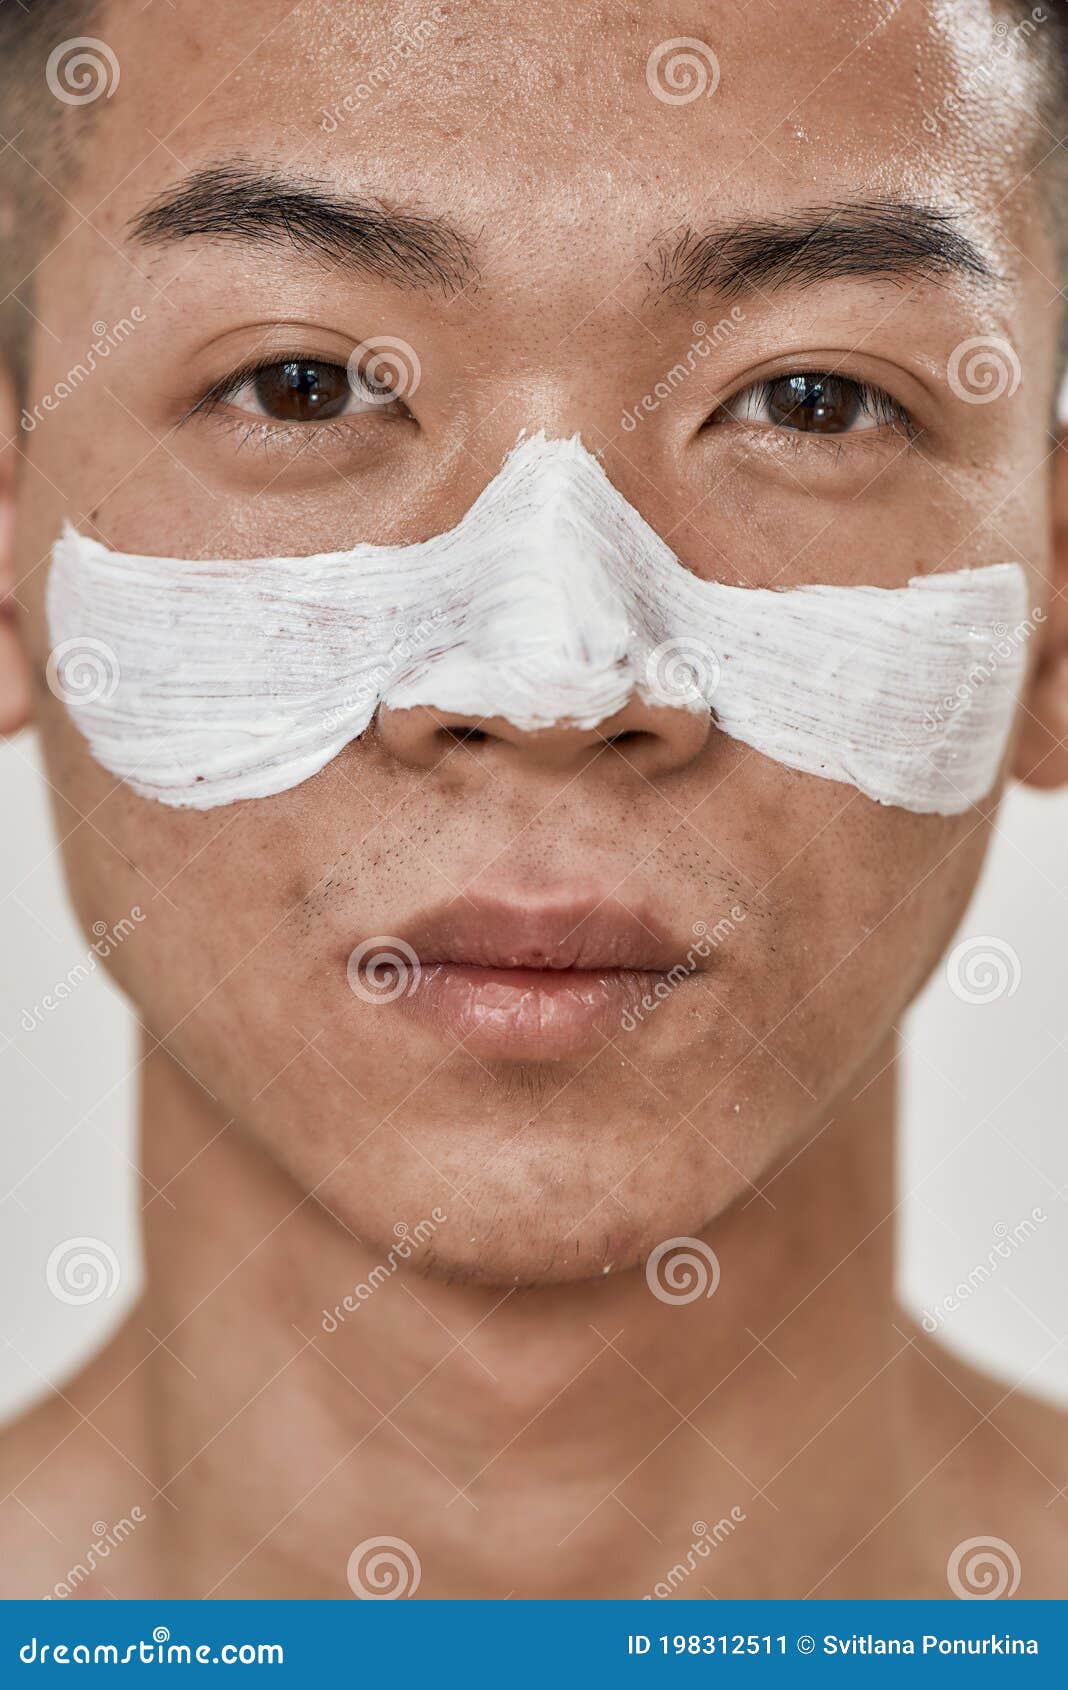 close up portrait of young asian man with problematic skin and hyperpigmentation applied mask on his face, looking at